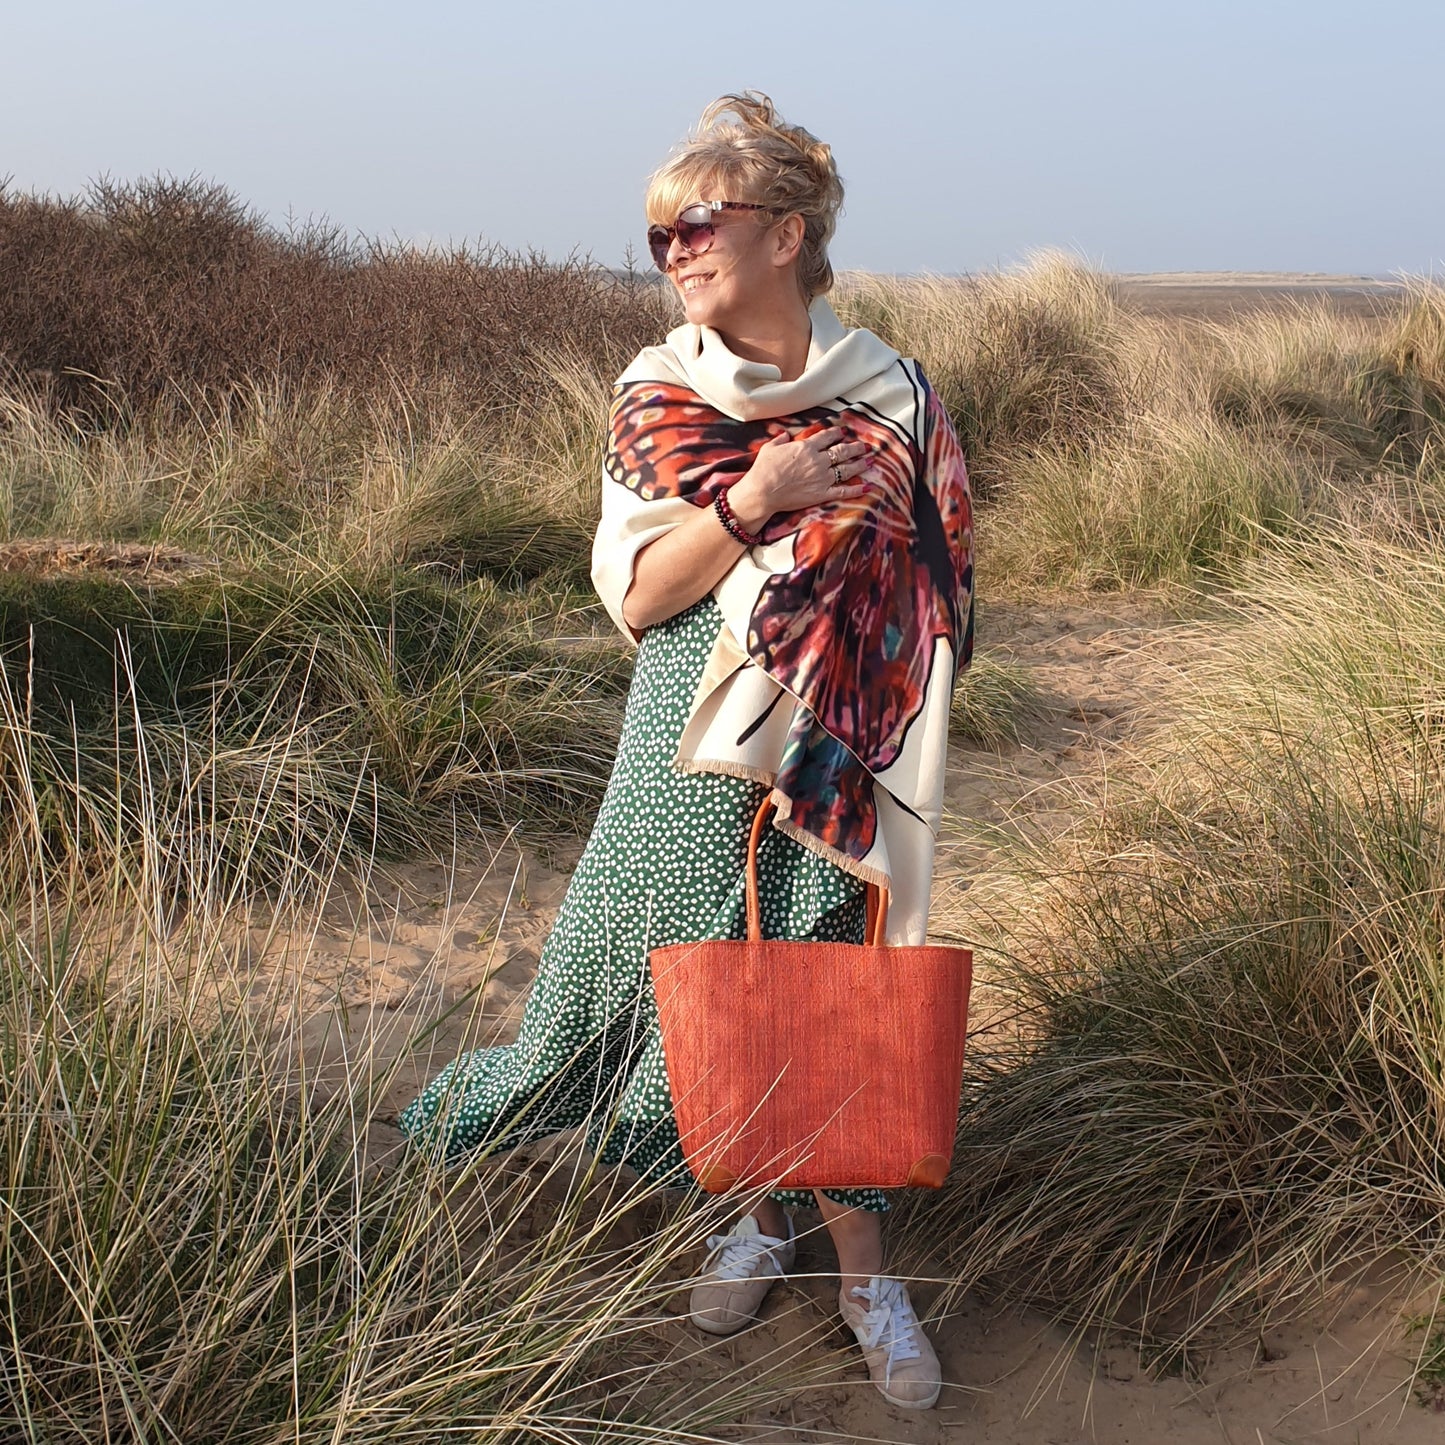 Lady on the beach carrying a red raffia basket 